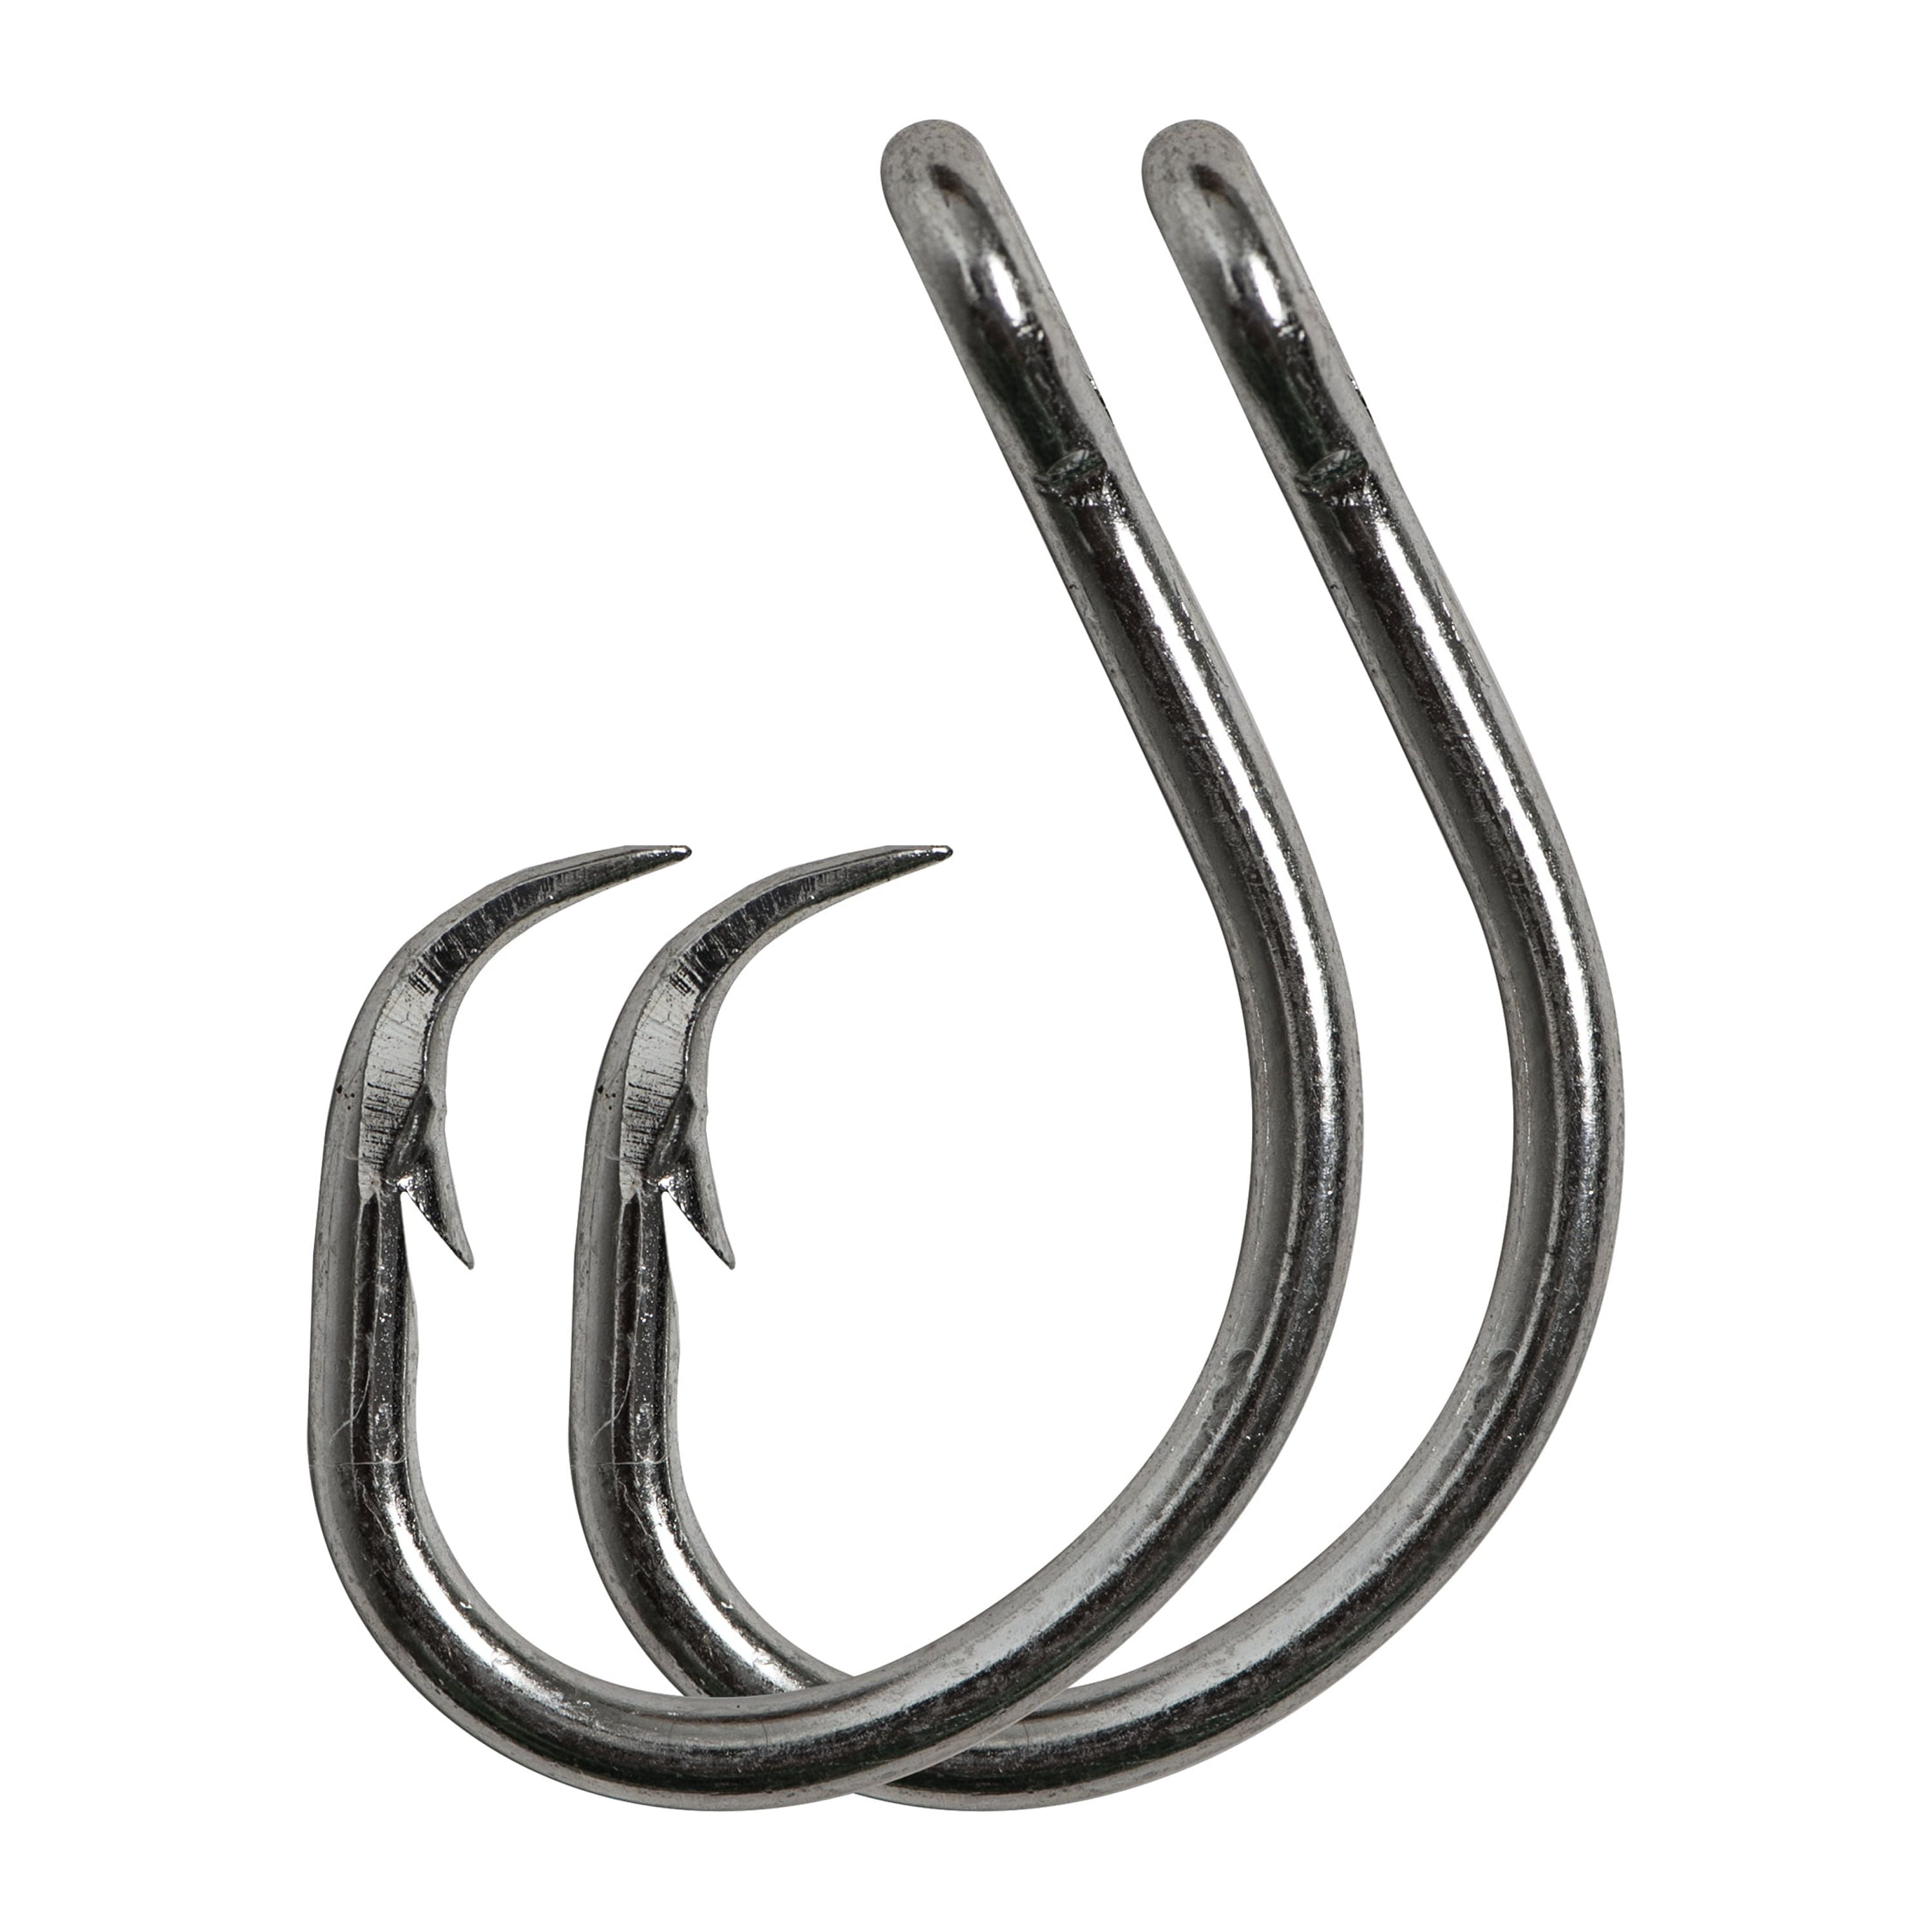 How to GAP Circle Shark Surf Fishing Hooks - A DISCUSSION - Mustad Fishing  Hook 